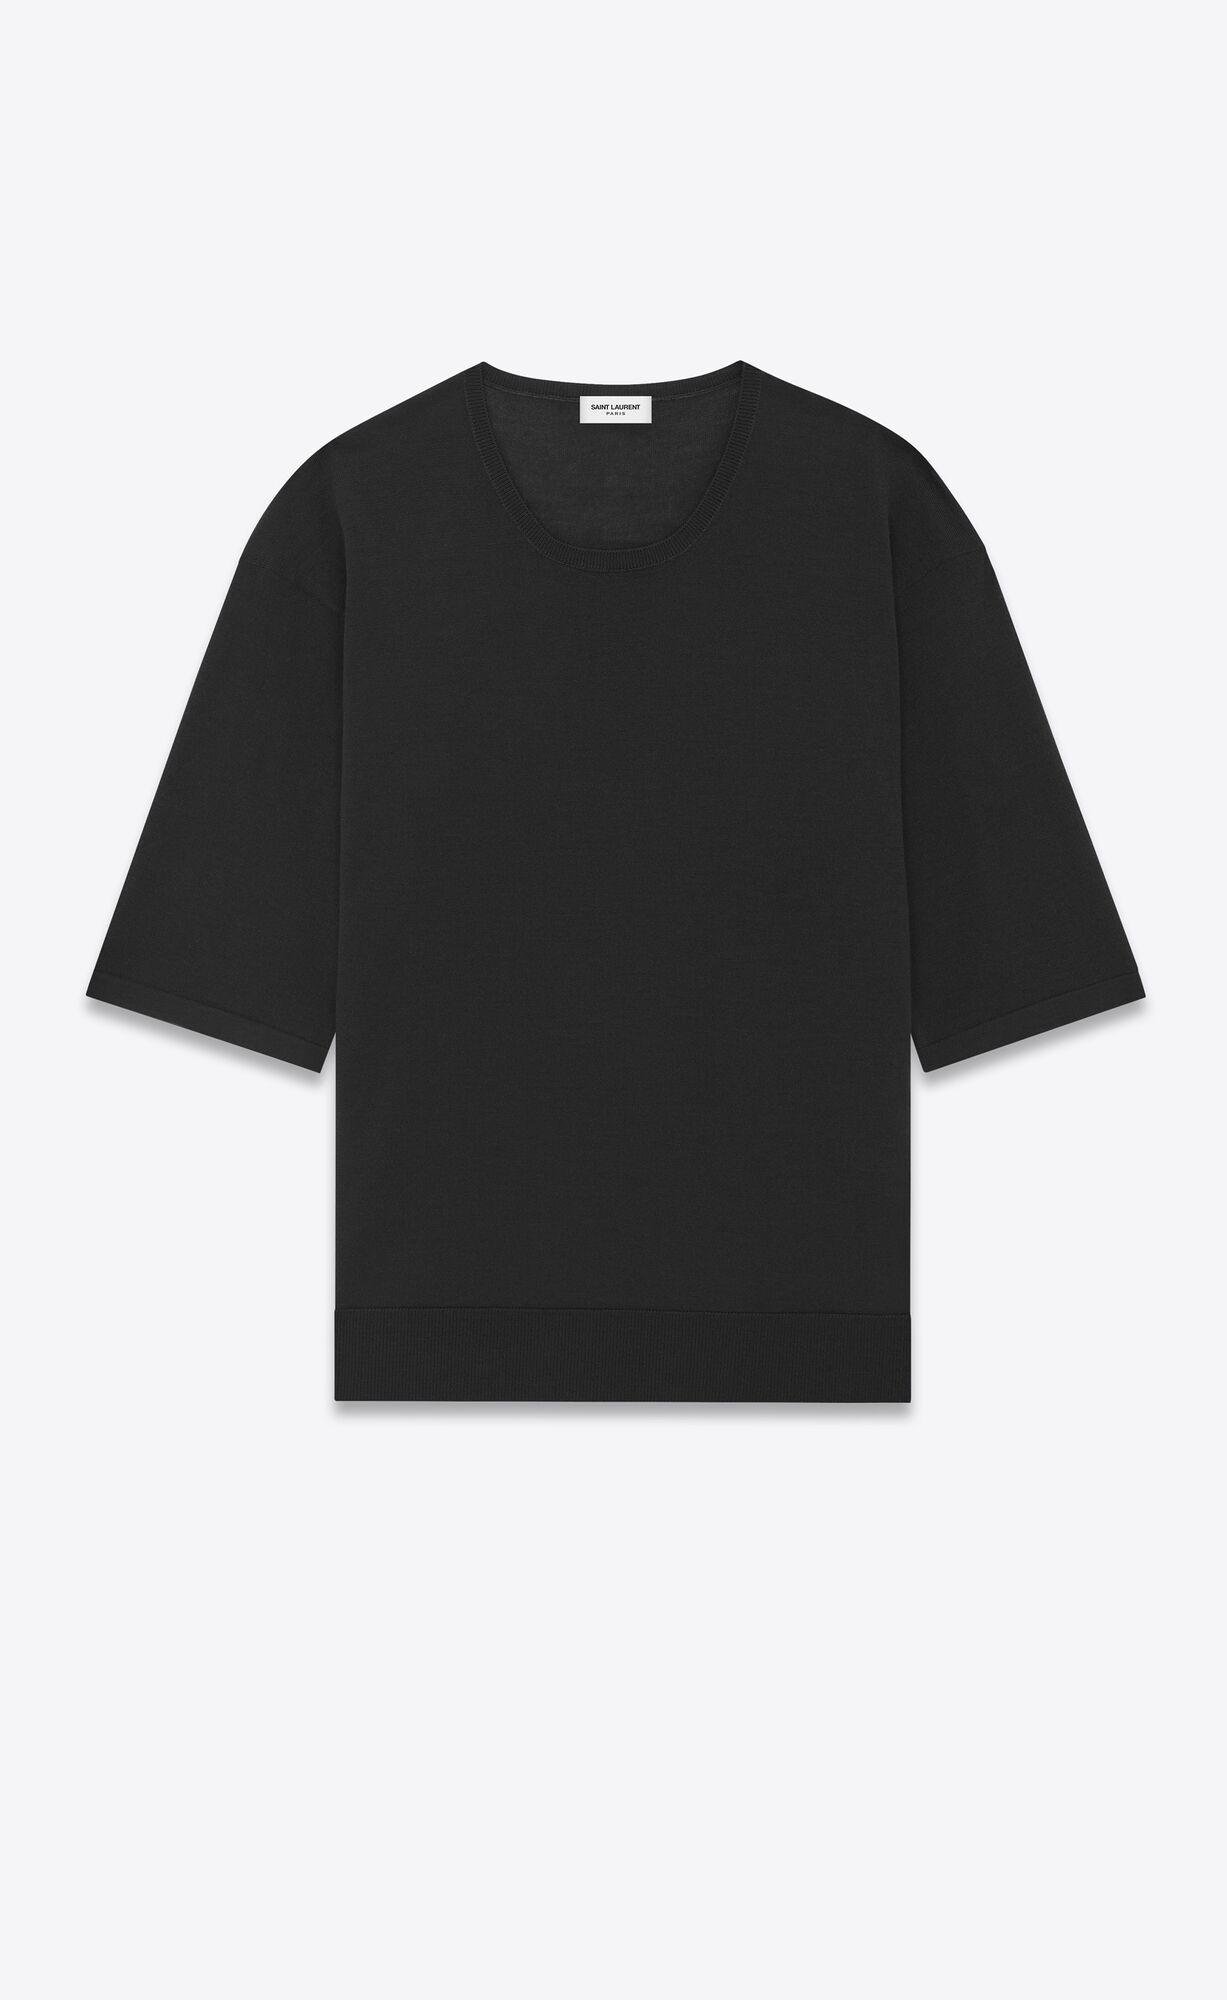 top in cashmere, wool and silk by SAINT LAURENT